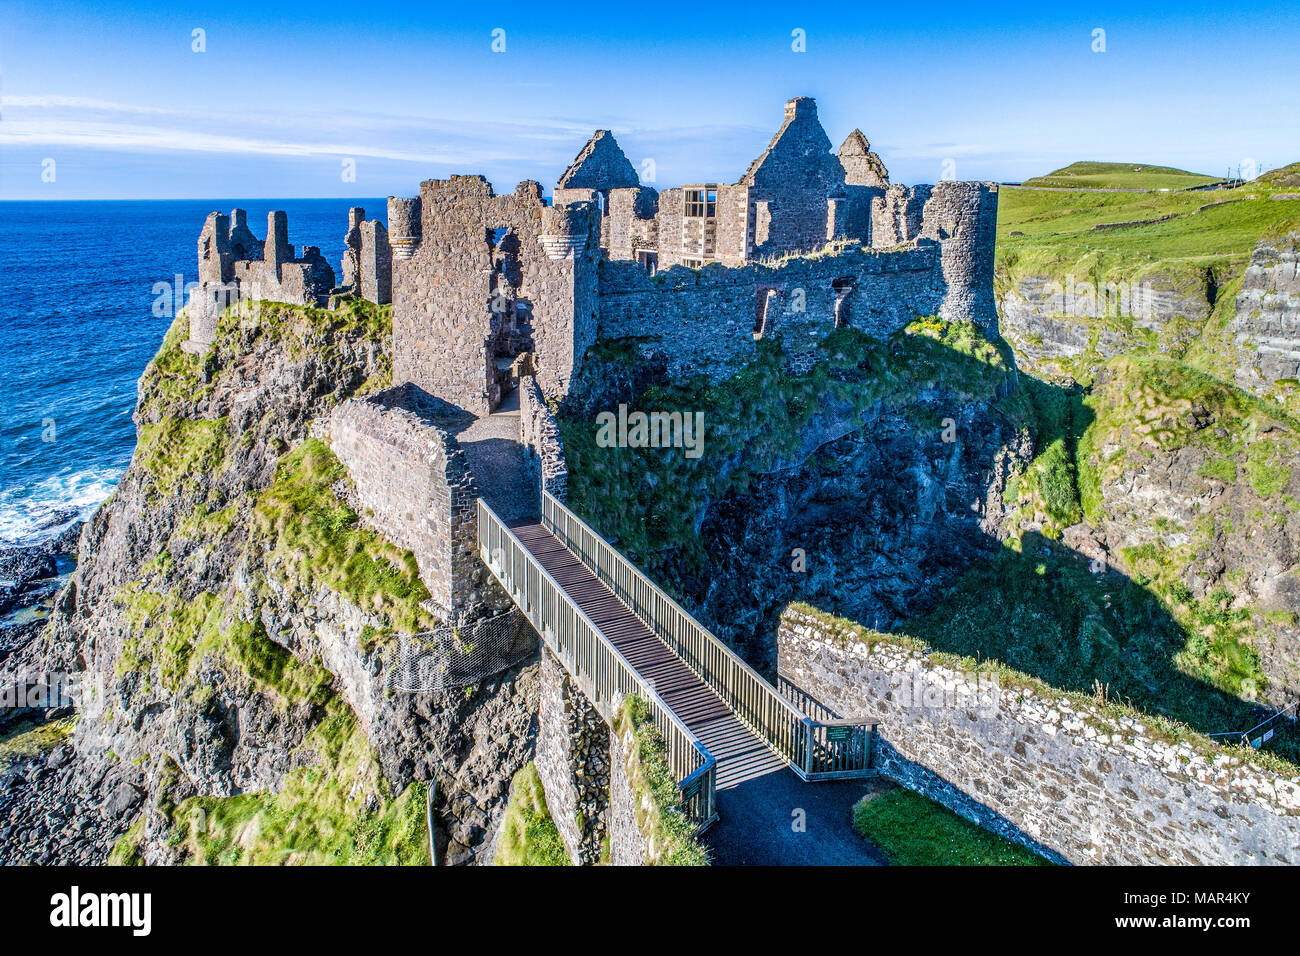 Ruins of medieval Dunluce Castle on a steep cliff. Northern coast of County Antrim, Northern Ireland, UK. Aerial view at sunset light. Stock Photo